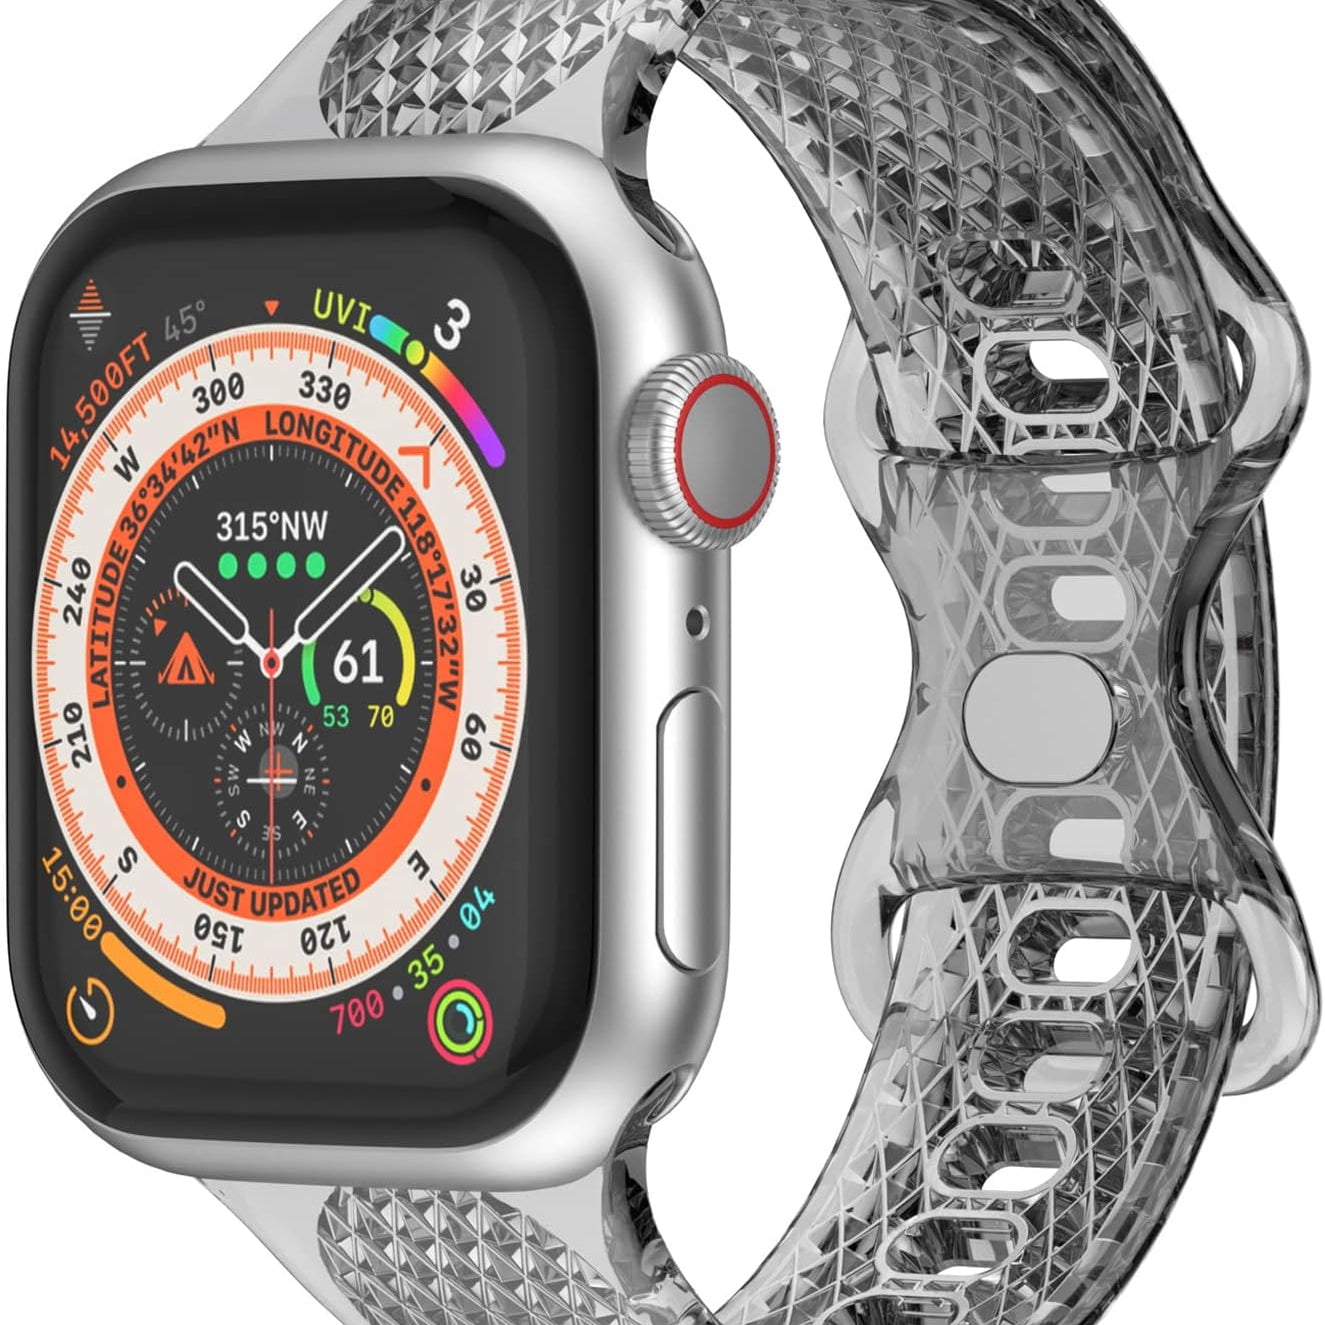 ClearGlide JellyGroove Silicone Sport Band For Apple Watch Multiple Colors Available